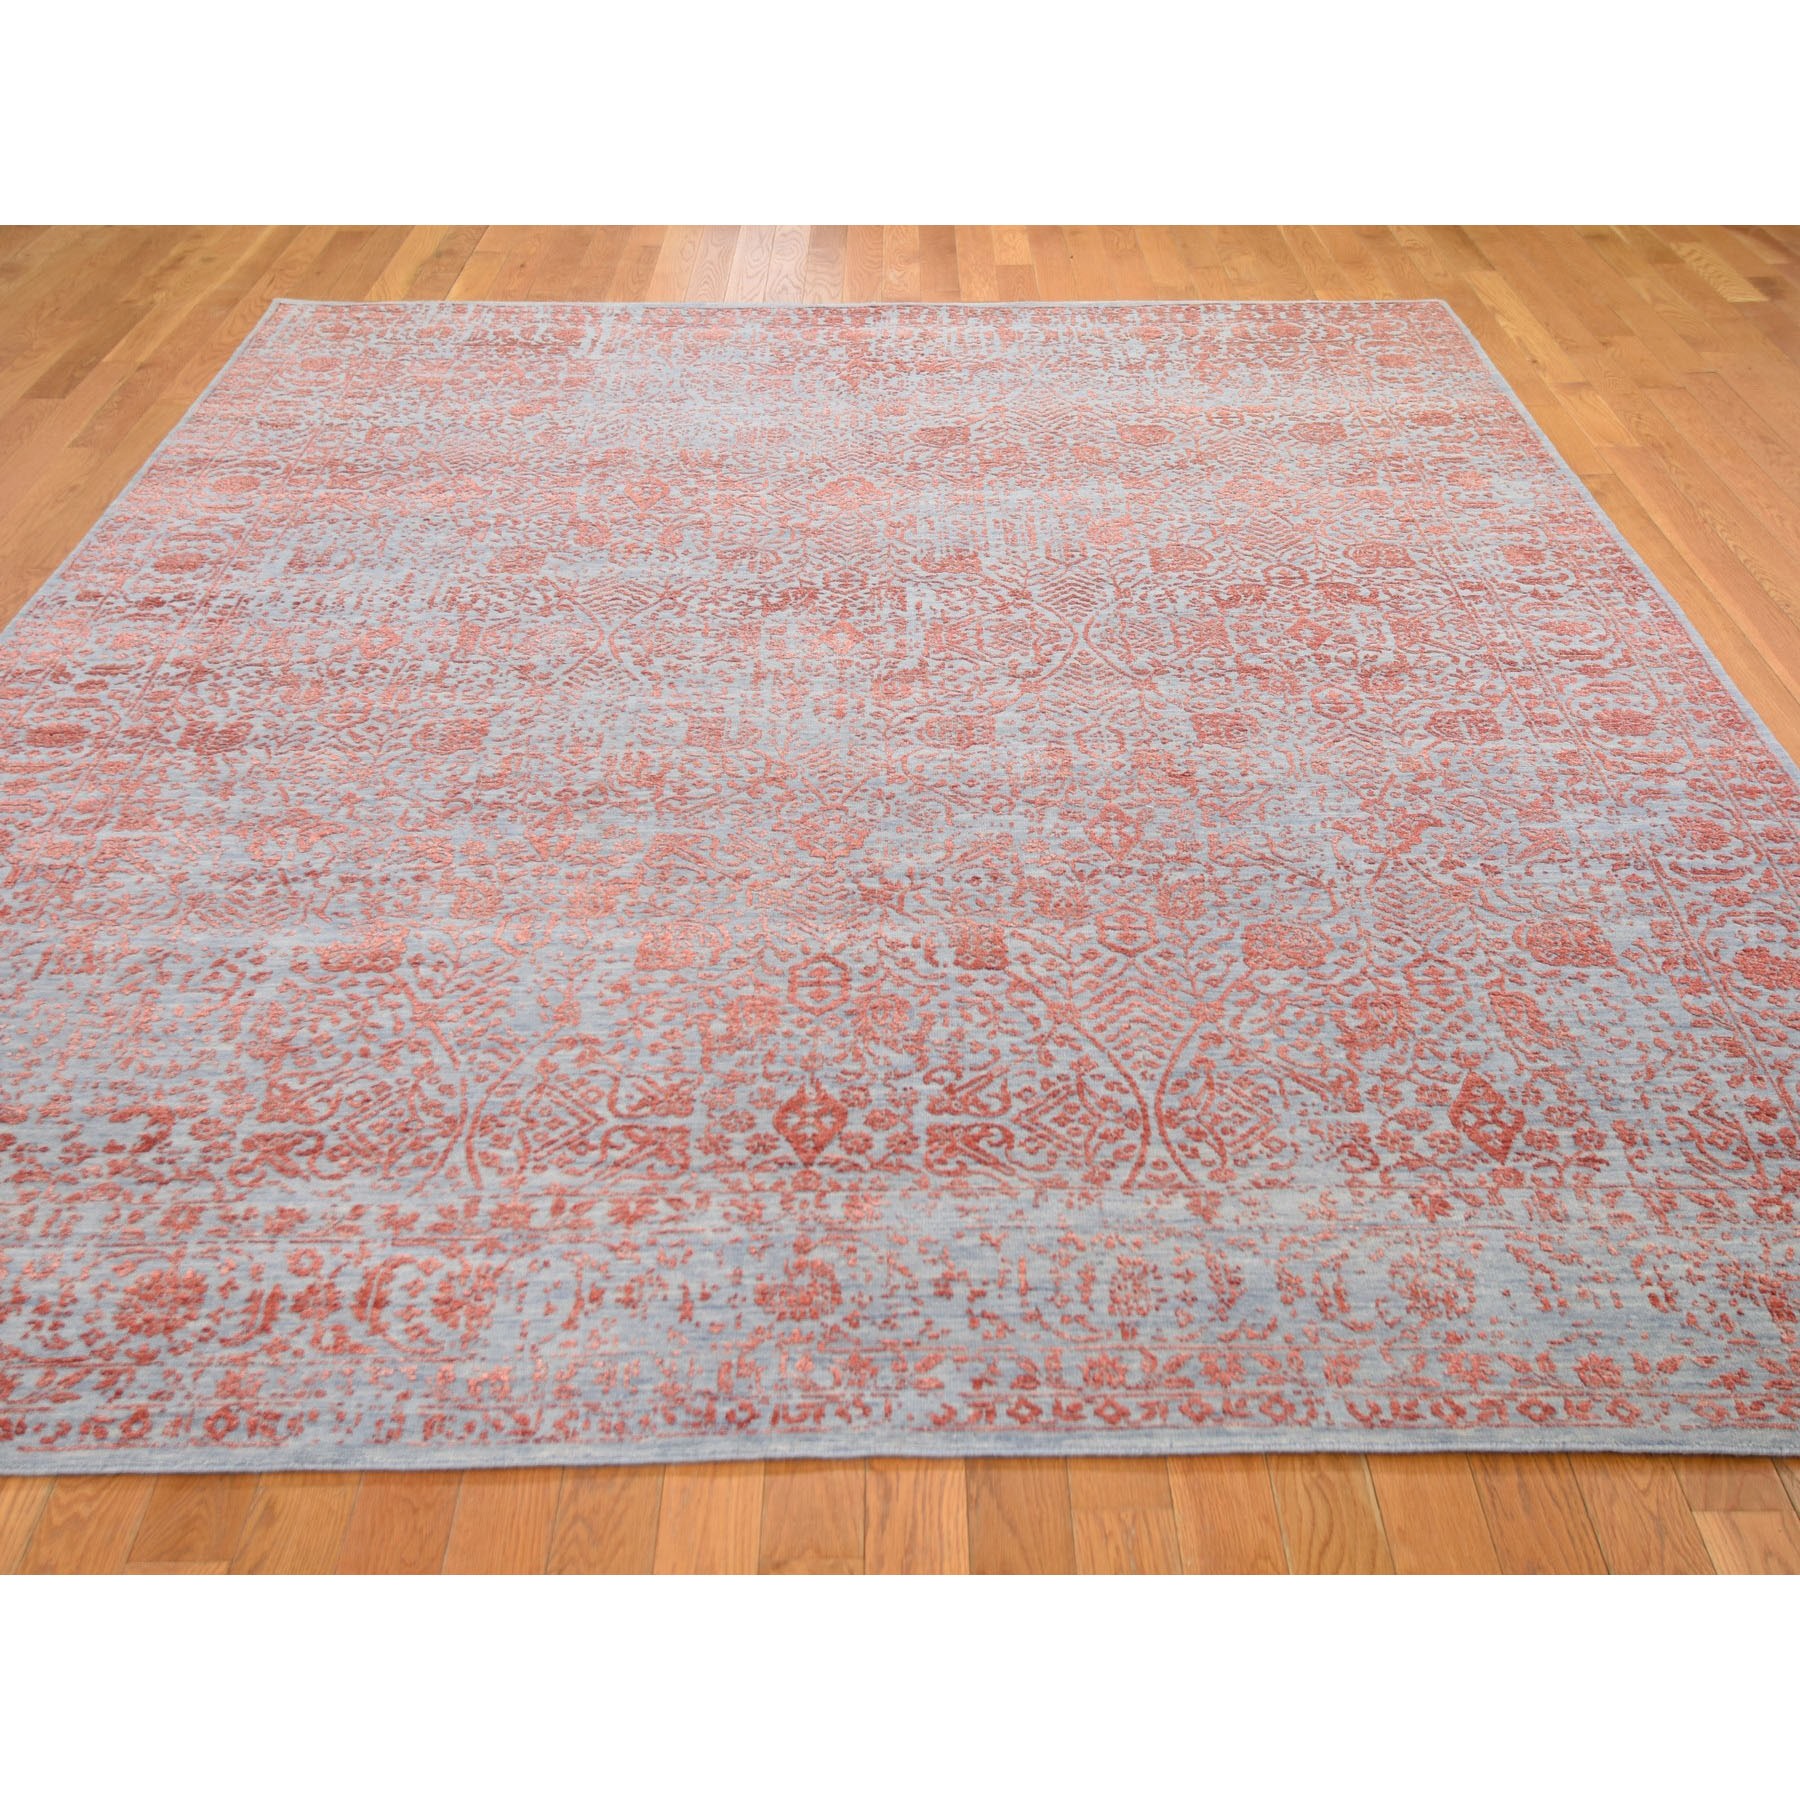 8-x9-9  Rust Tone on Tone Wool And Silk Erased Vase Design Hand Knotted Oriental Rug 